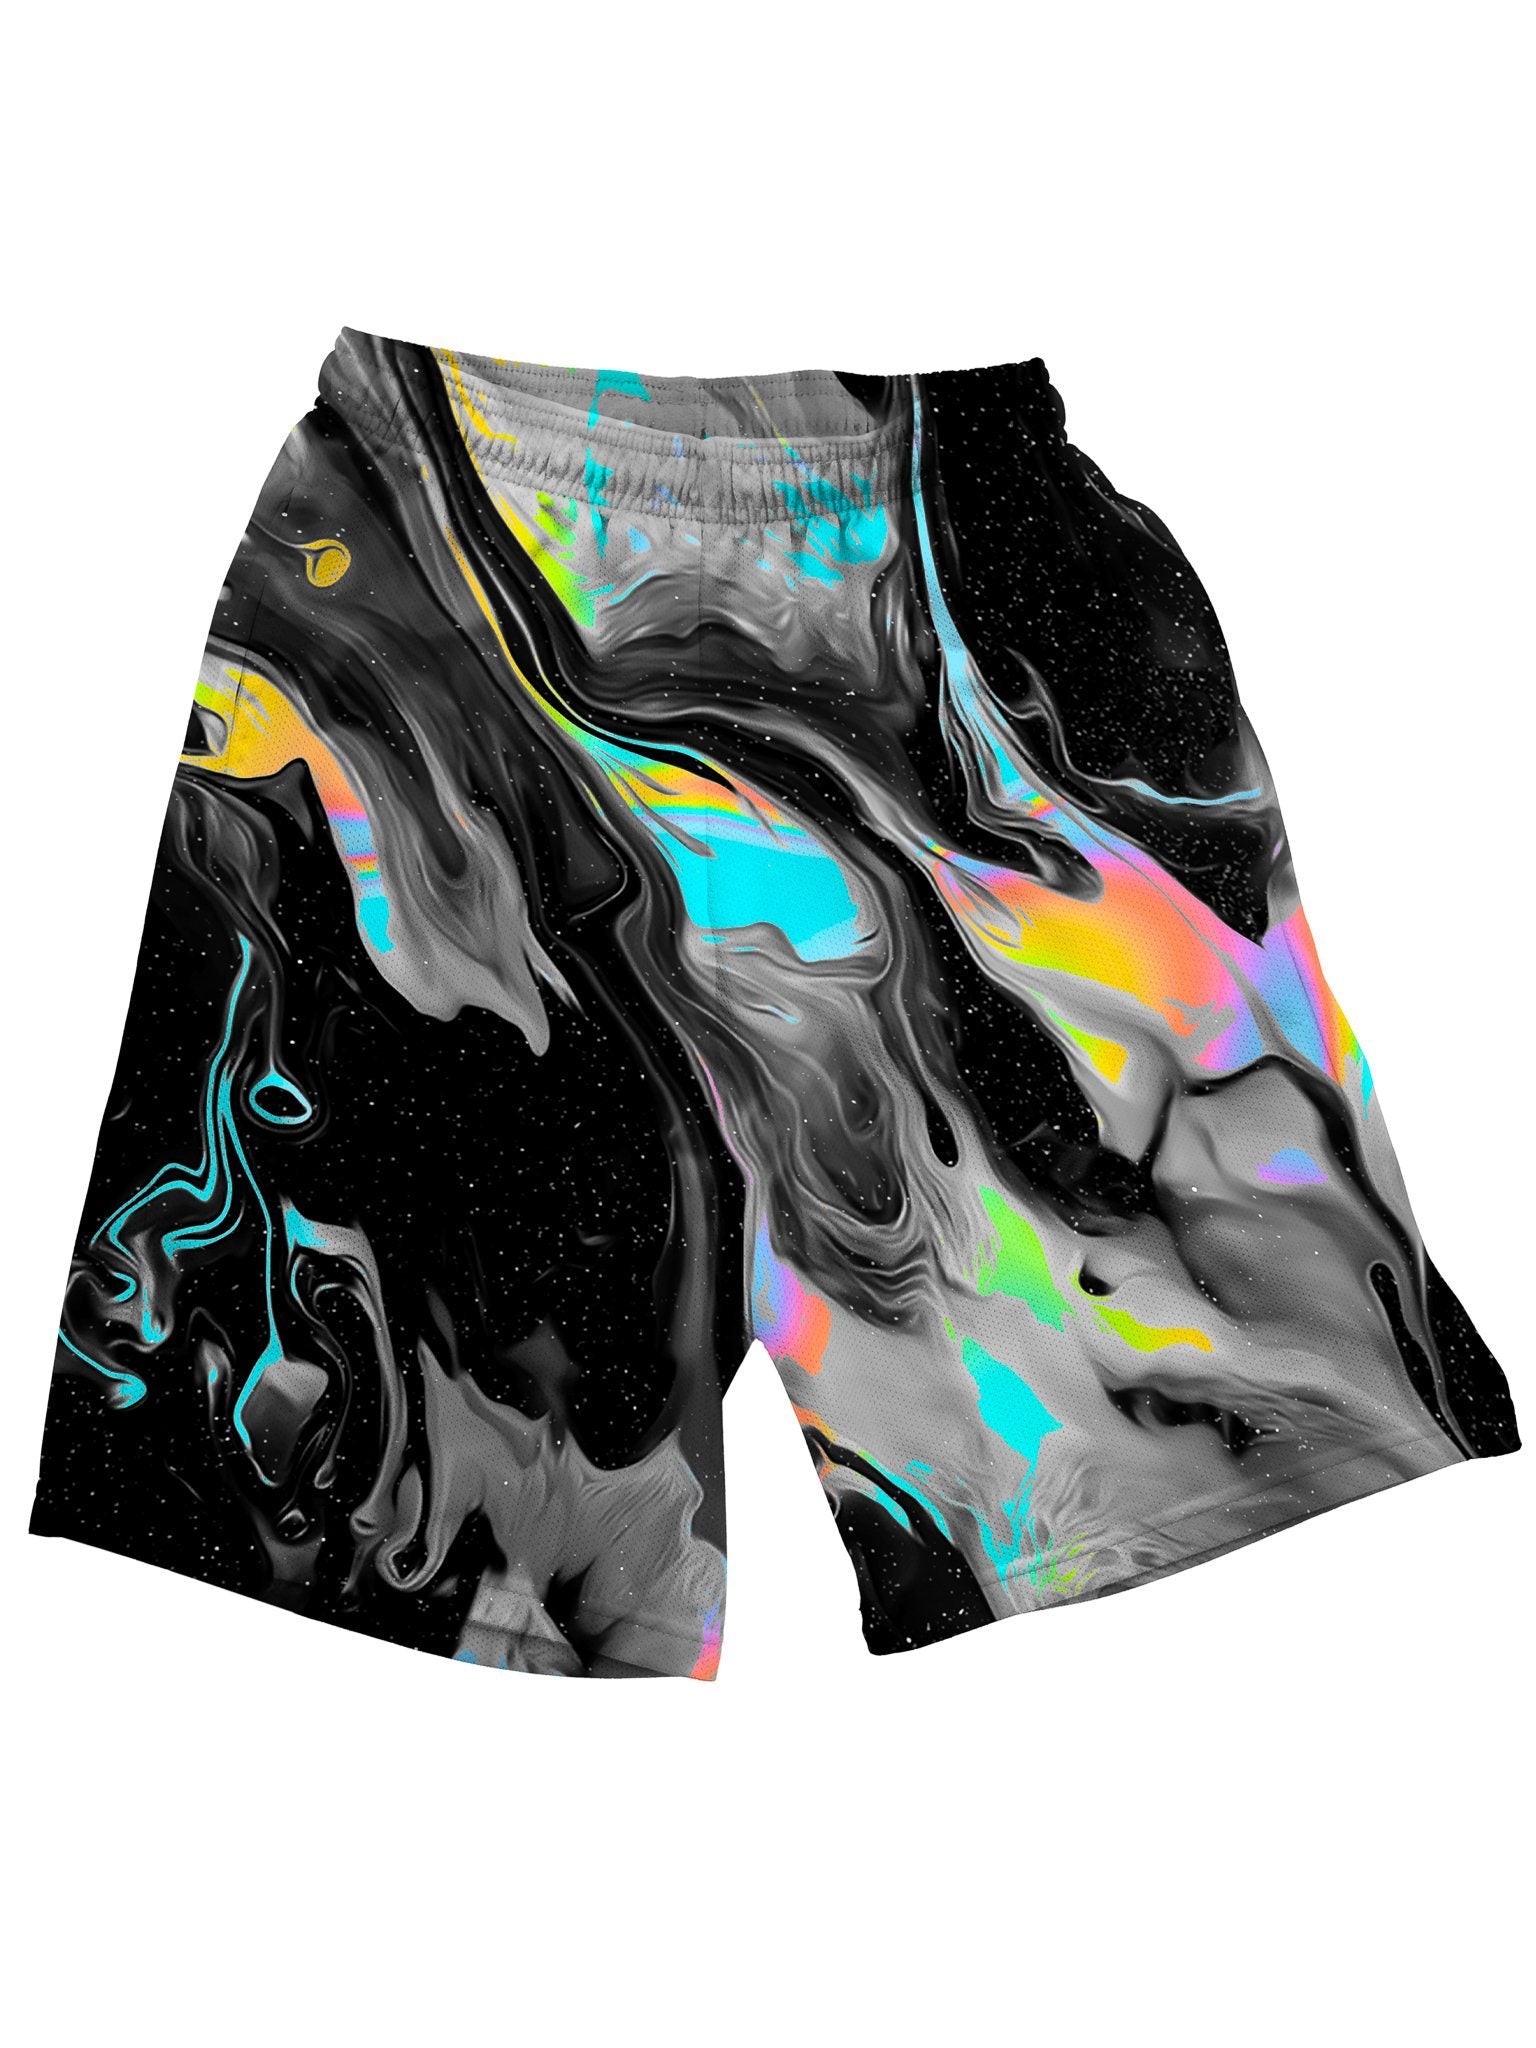 Kings Of Chrome Shorts - Electro Threads